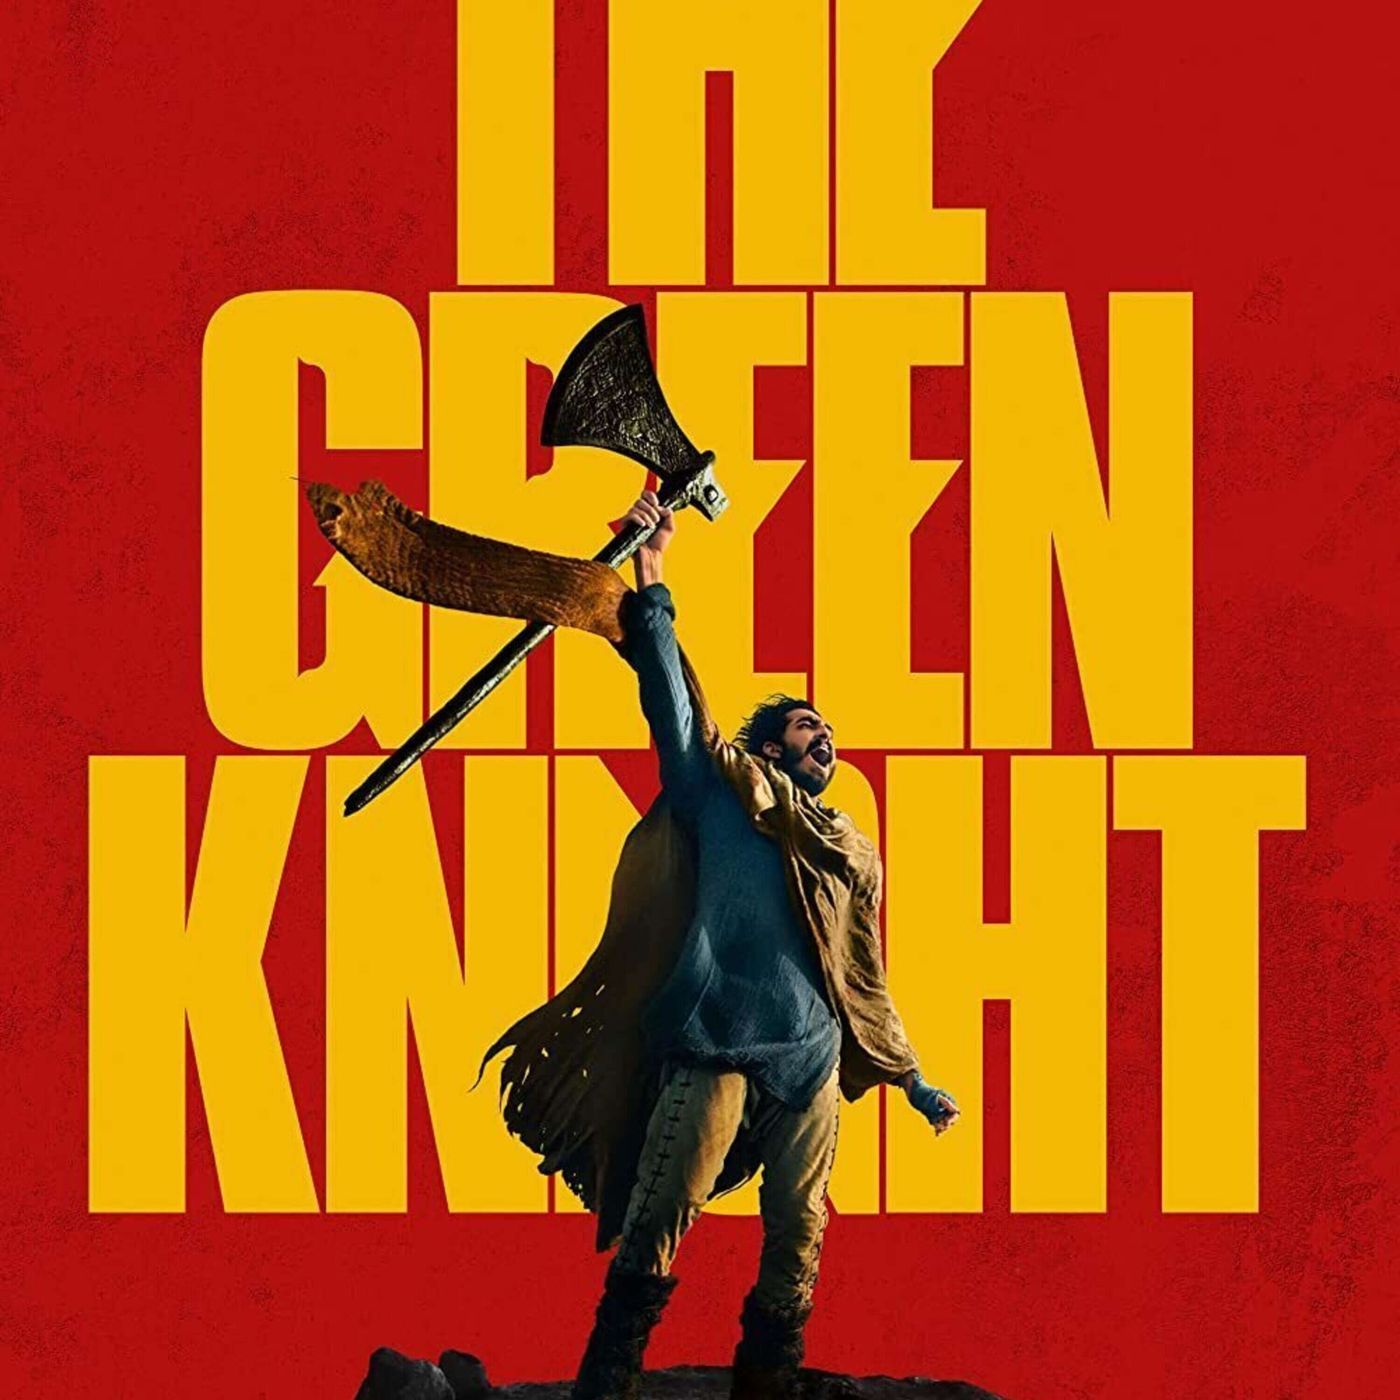 The Green Knight Review